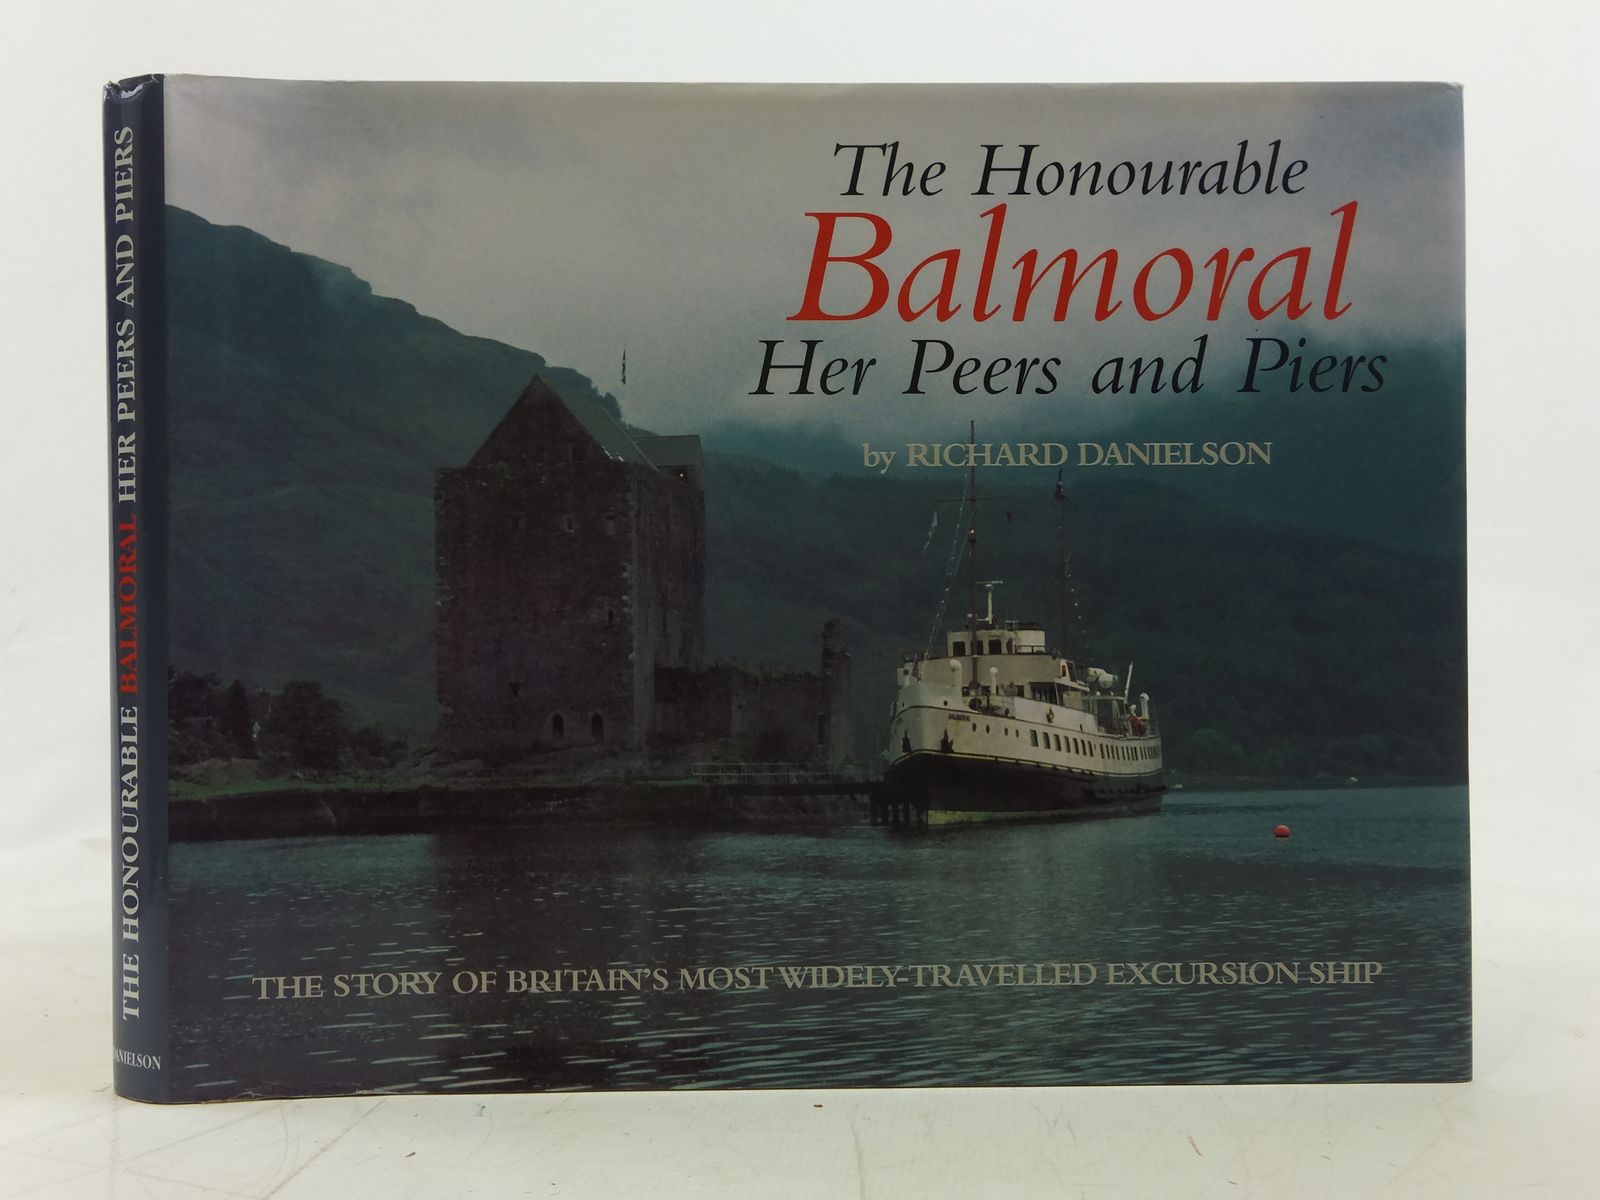 Photo of THE HONOURABLE BALMORAL HER PEERS AMD PIERS written by Danielson, Richard published by Maritime Publications (STOCK CODE: 2115735)  for sale by Stella & Rose's Books